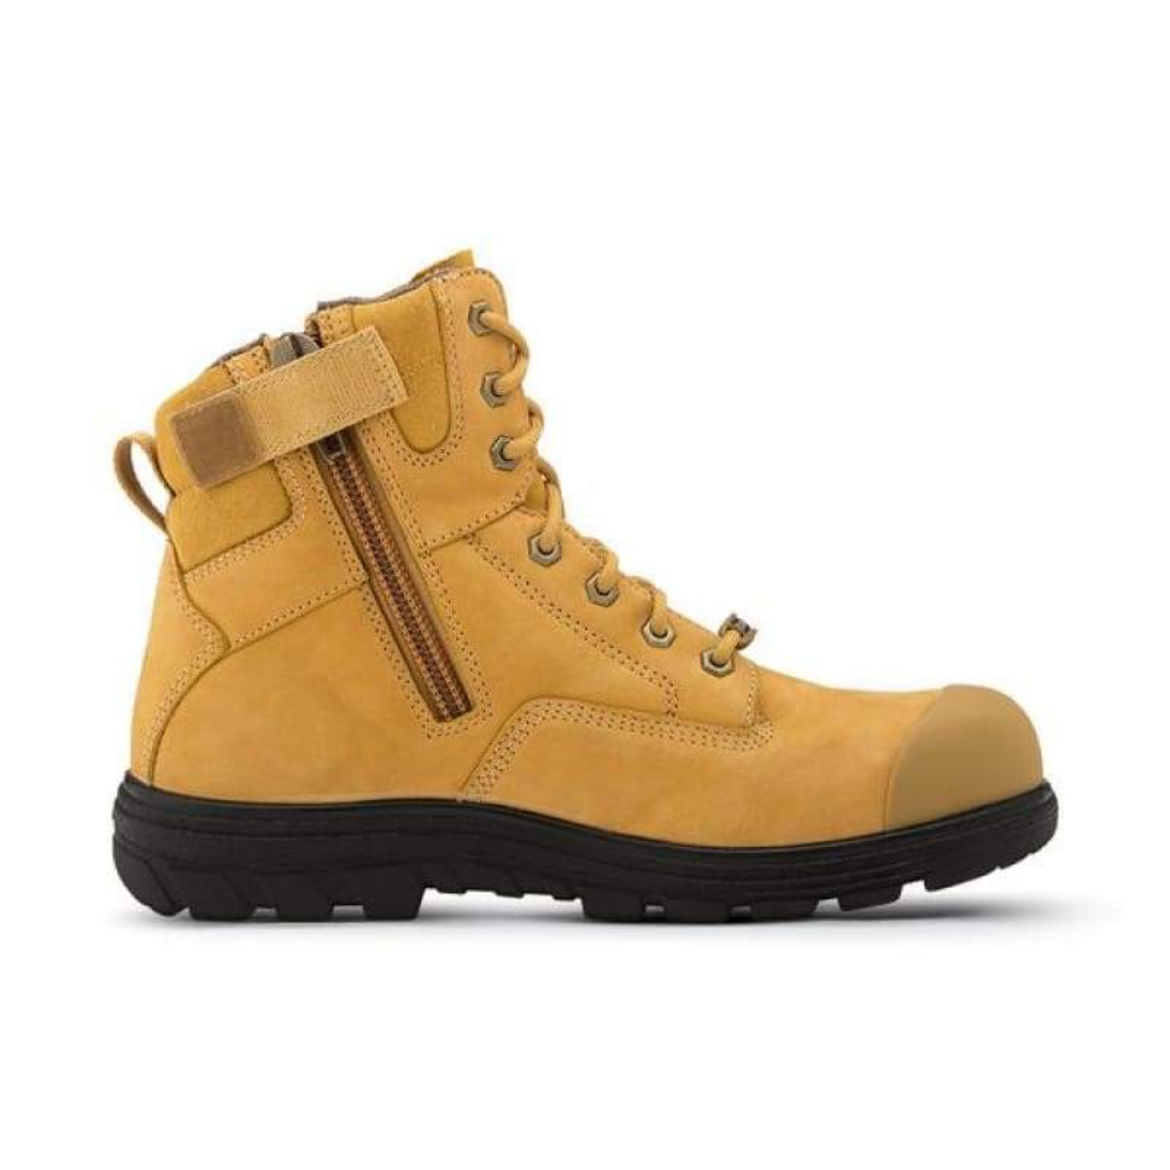 Picture of Ascent Footwear, Alpha 2, Safety Boot, Scuff Cap, Zip